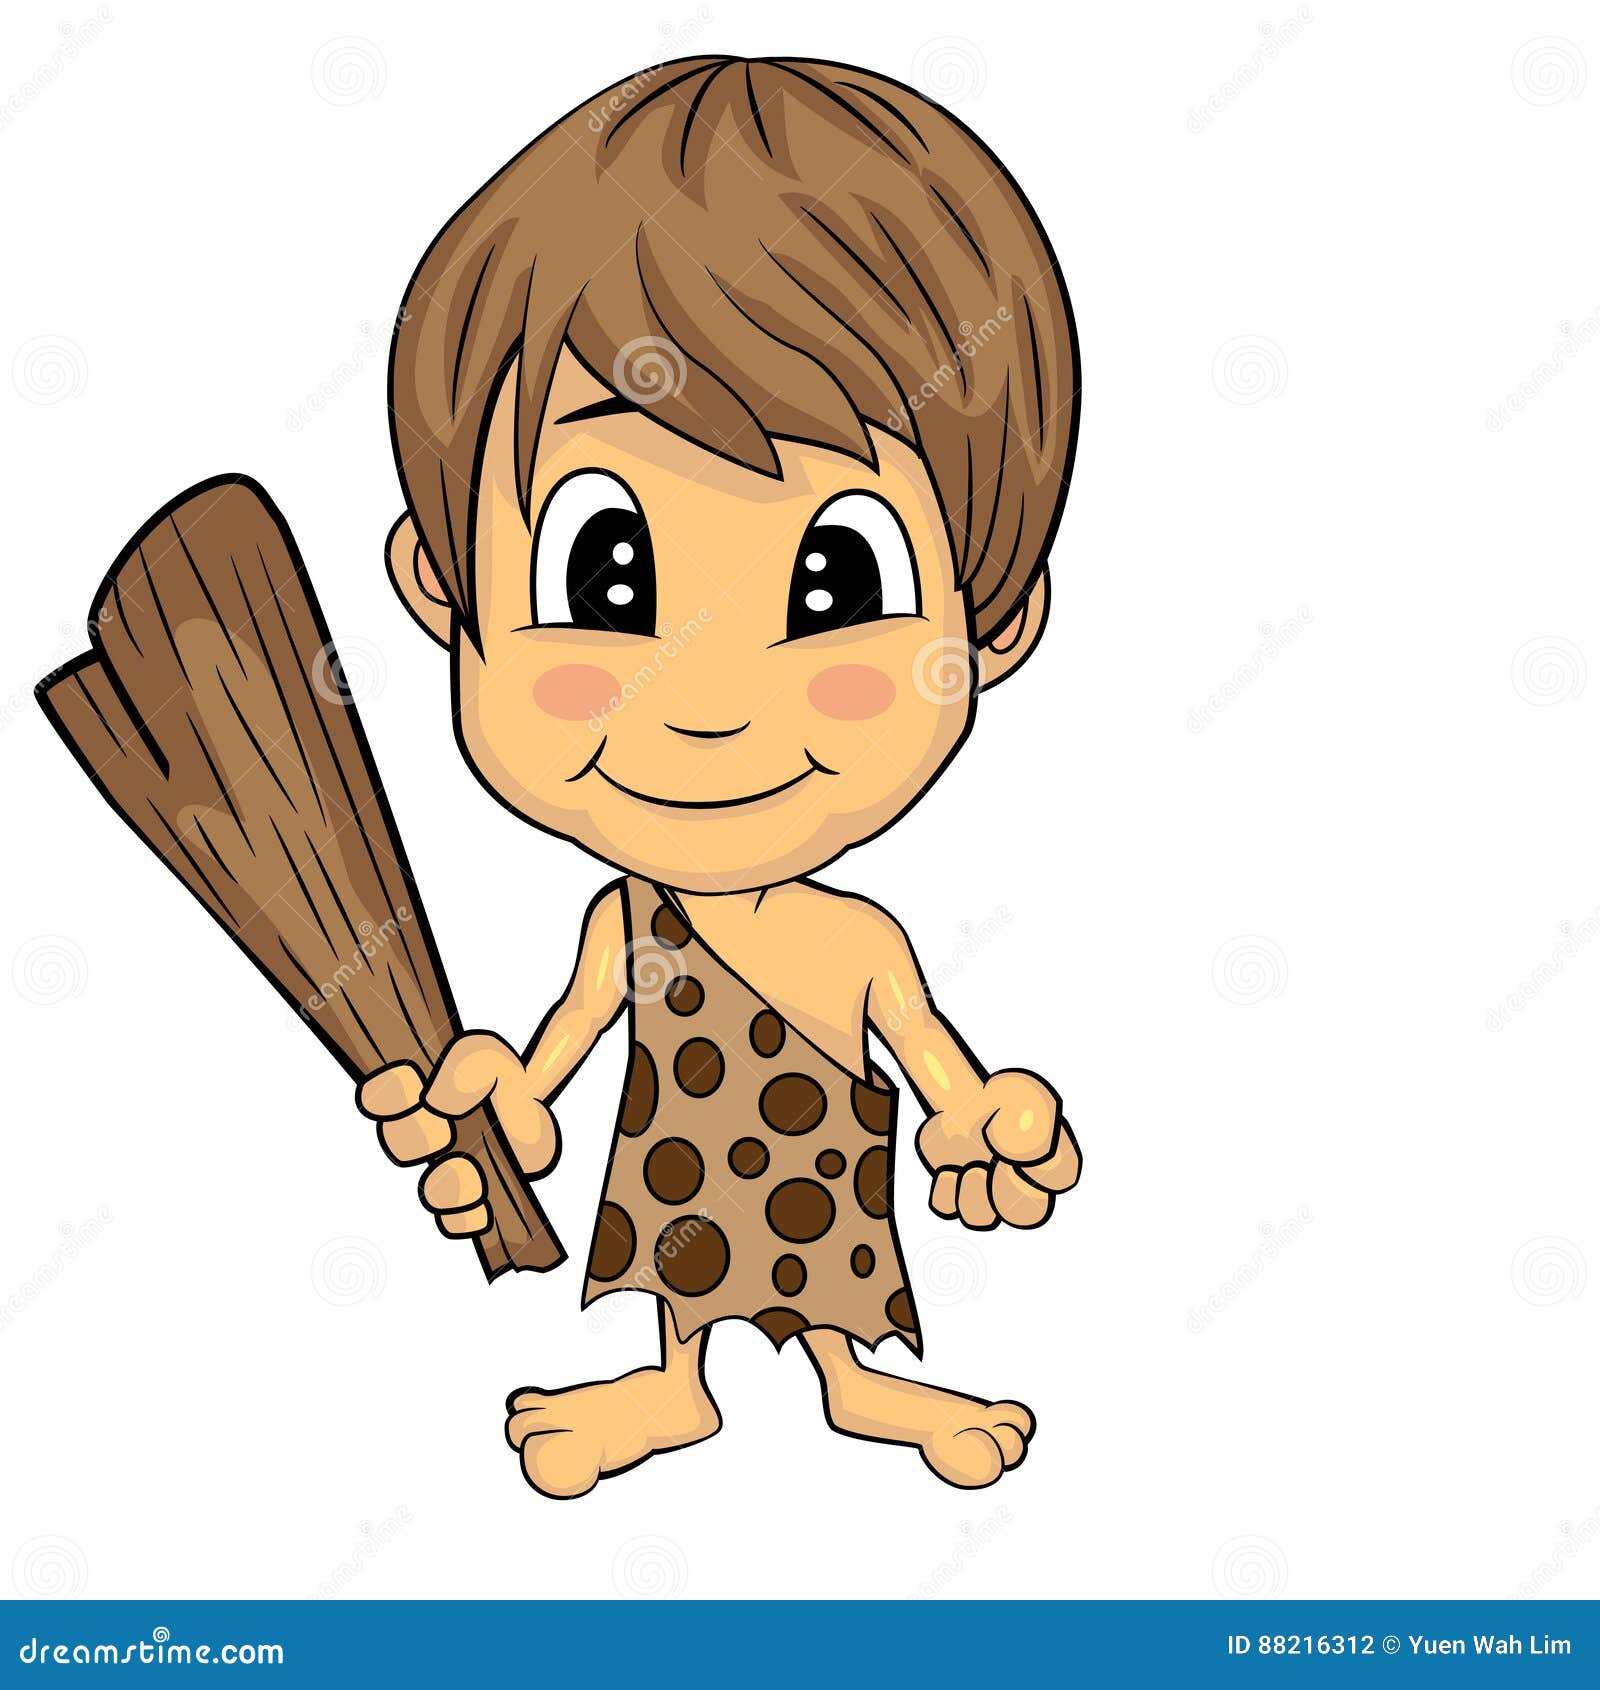 Cartoon Stone Age Cute Cave Boy Stock Vector - Illustration of ancient,  isolated: 88216312